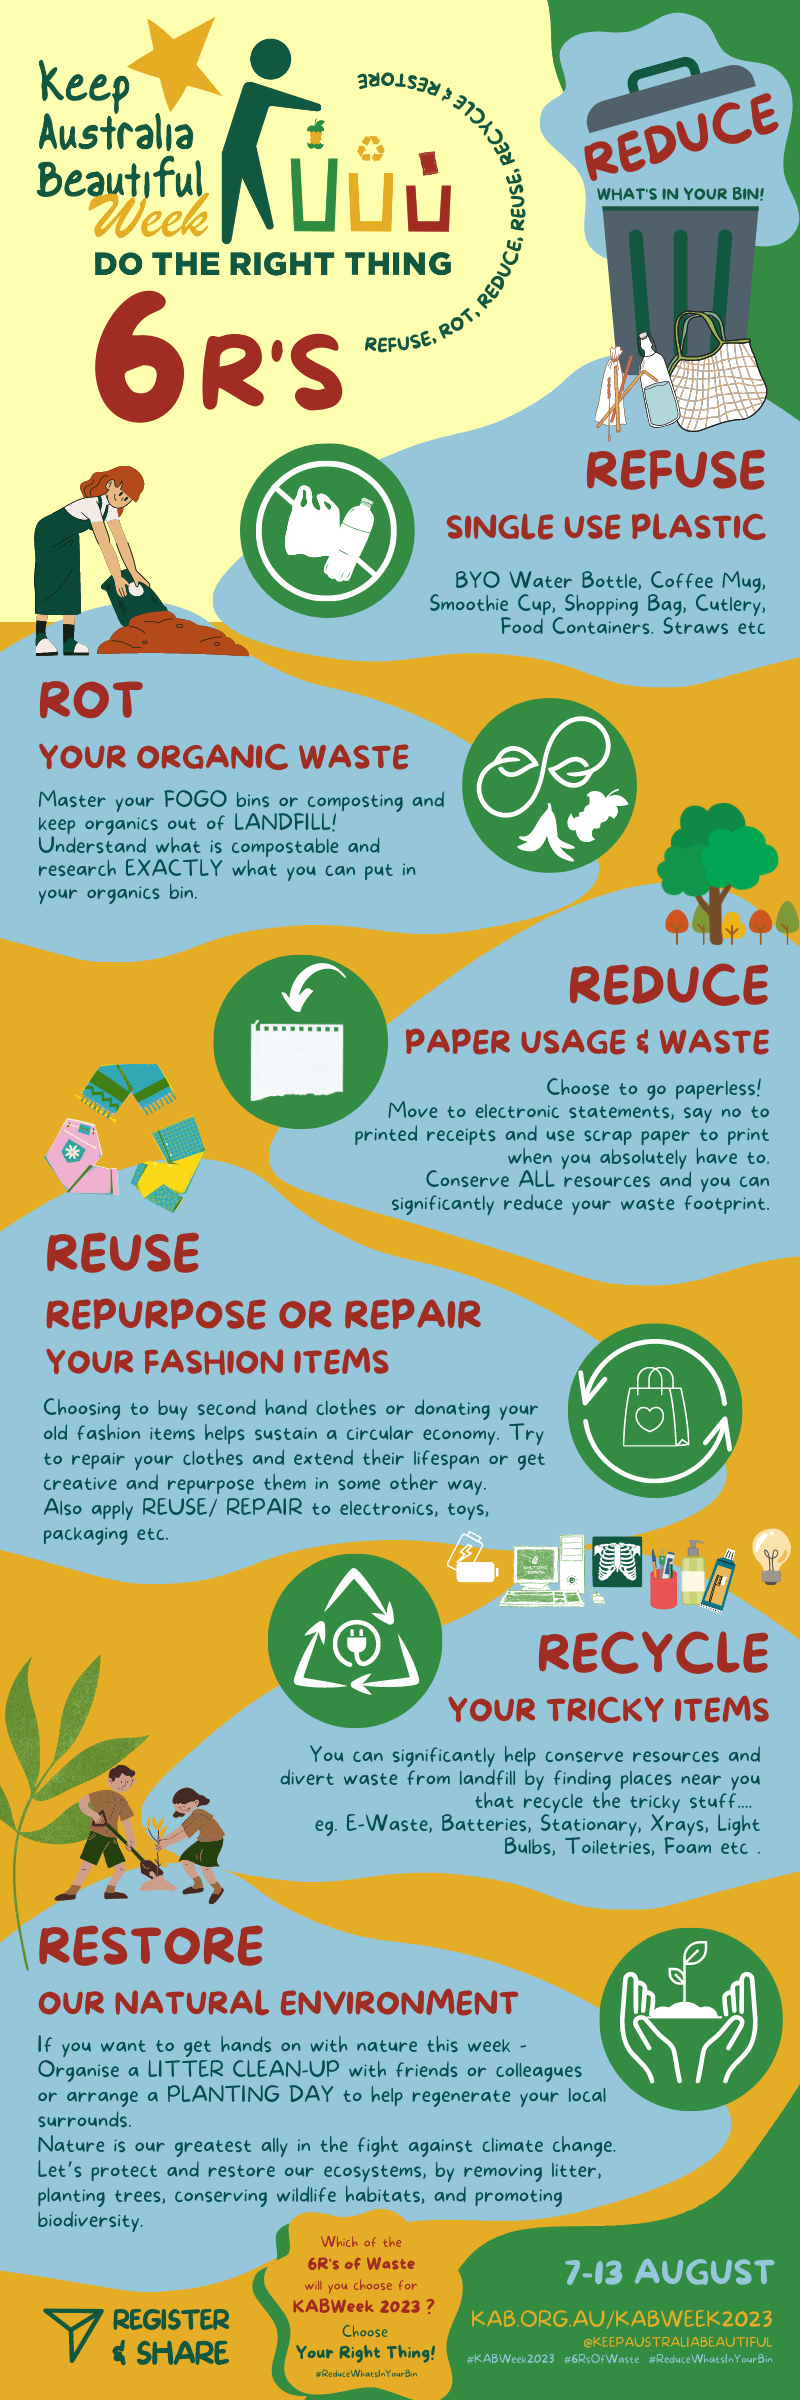 6R’s of Waste - Refuse, Rot, Reduce, Reuse, Recycle and Restore